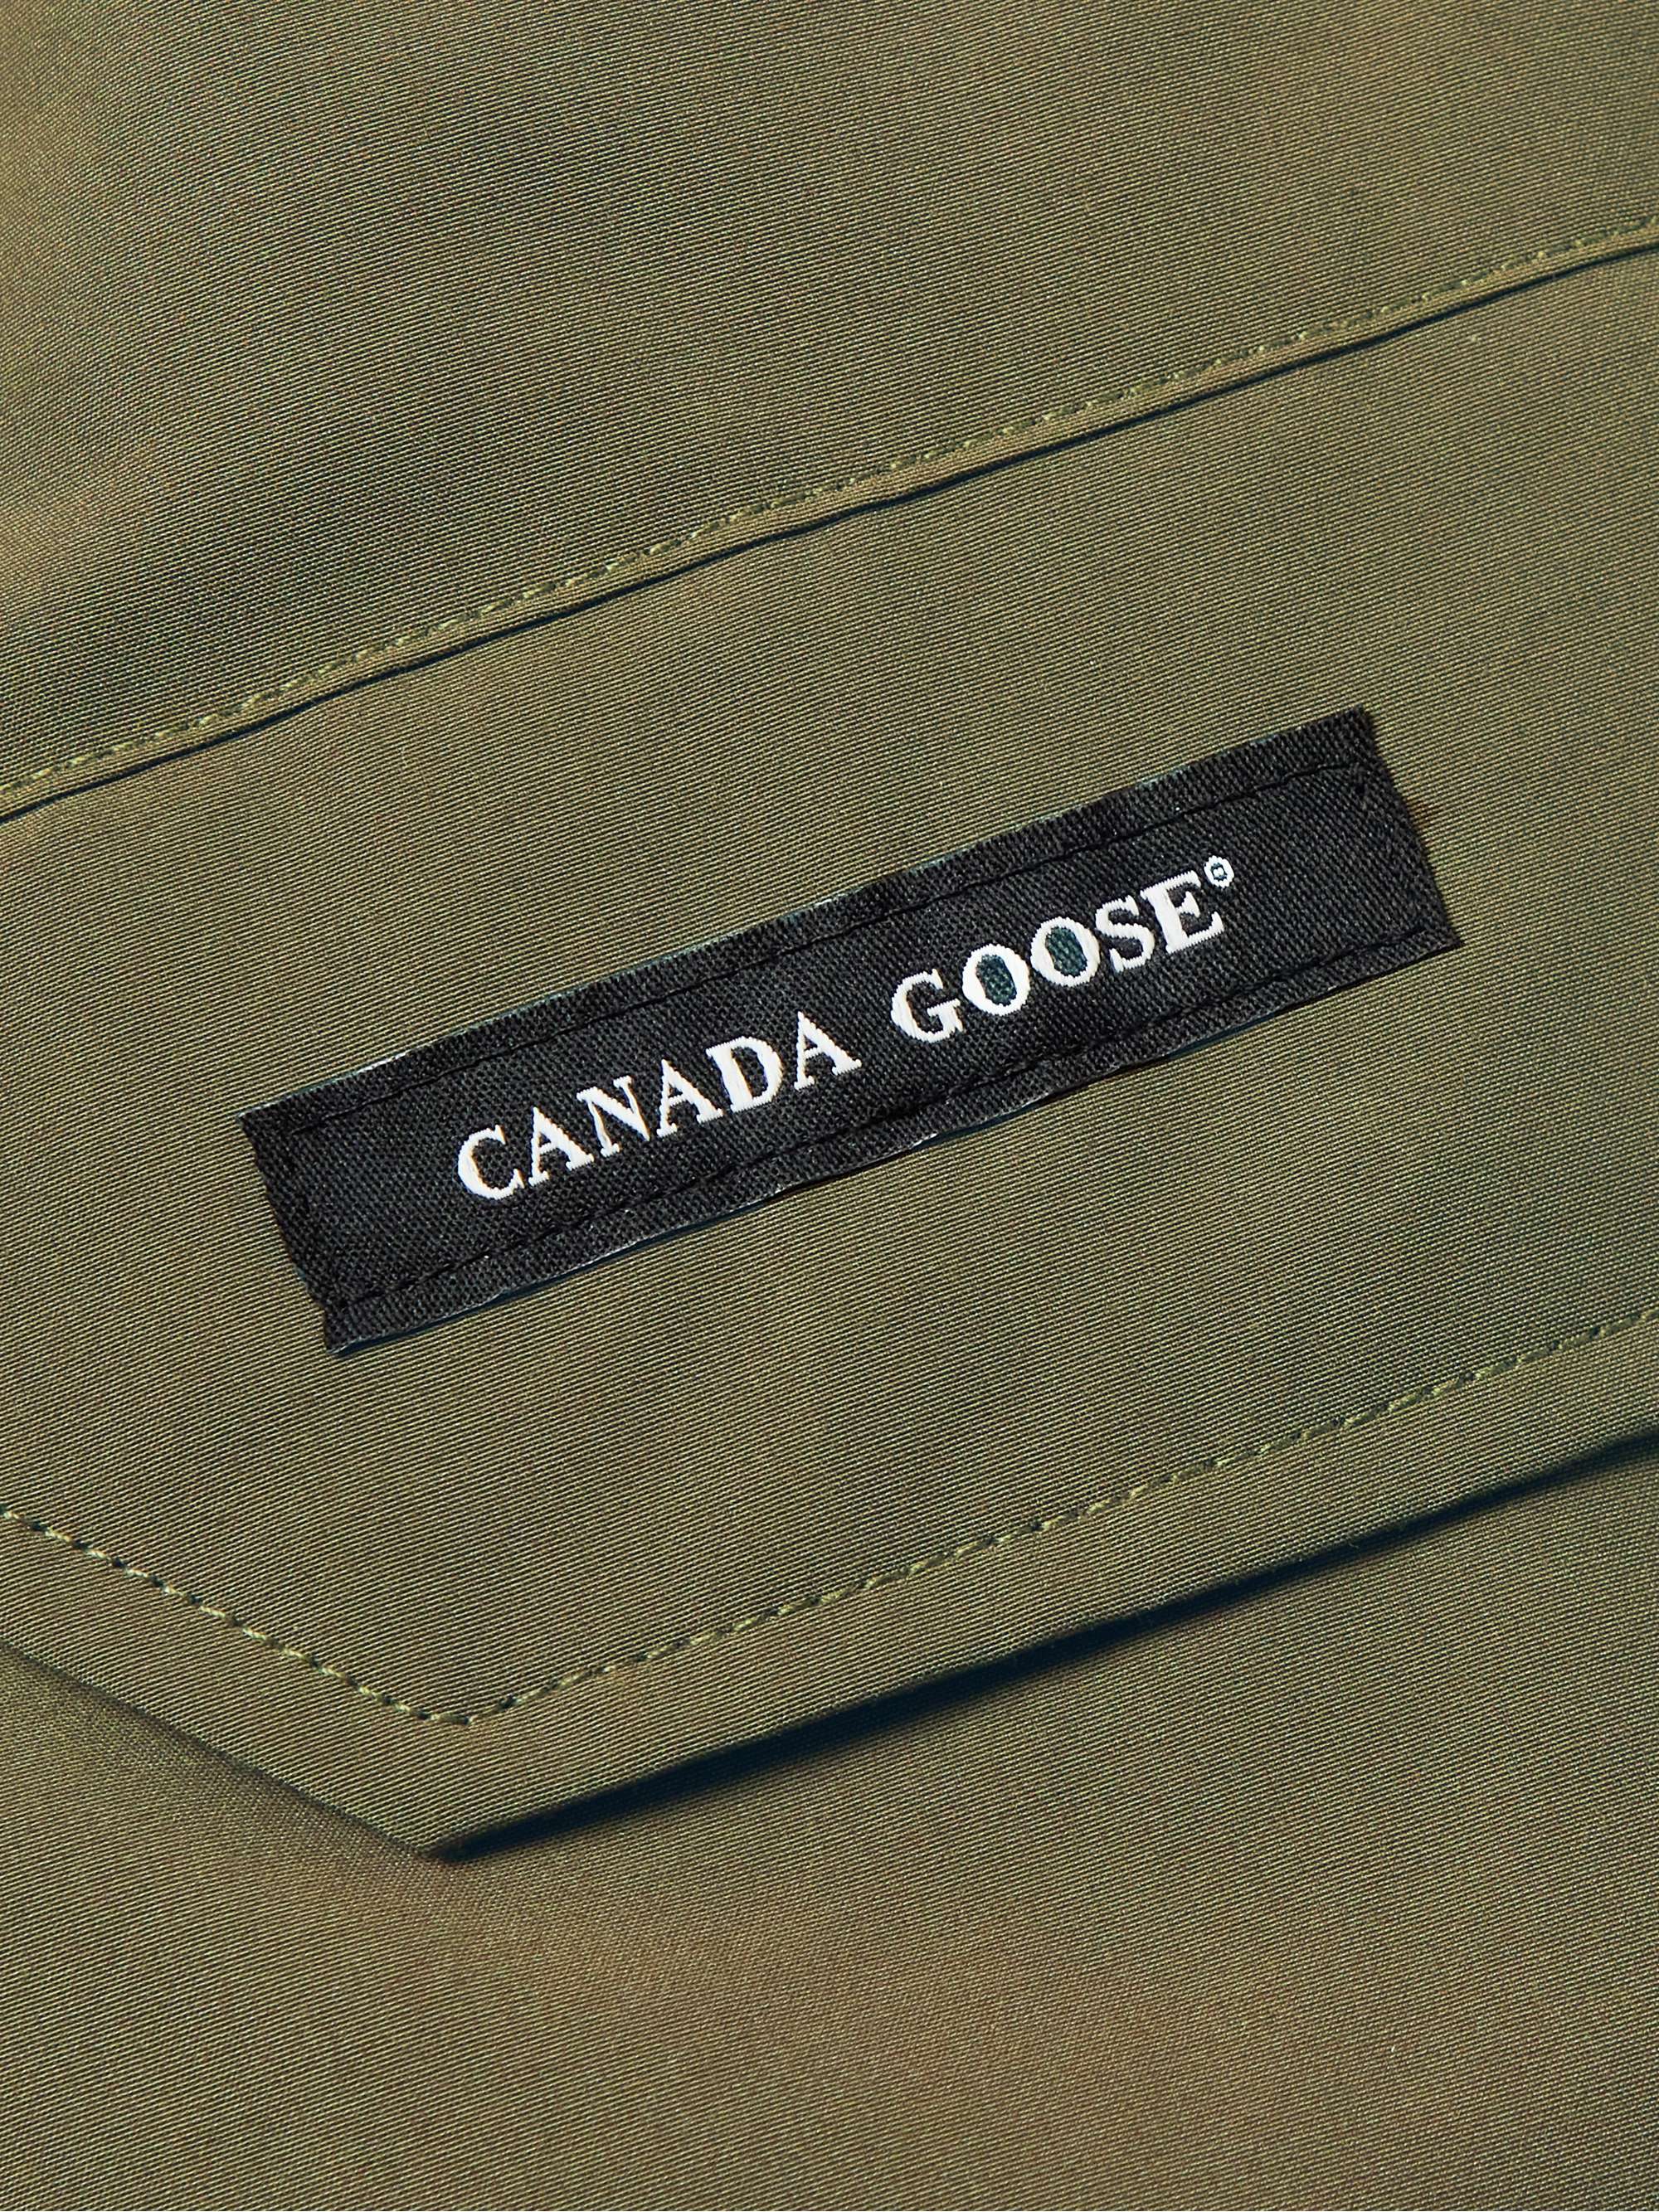 CANADA GOOSE Chilliwack Arctic Tech® Hooded Down Jacket